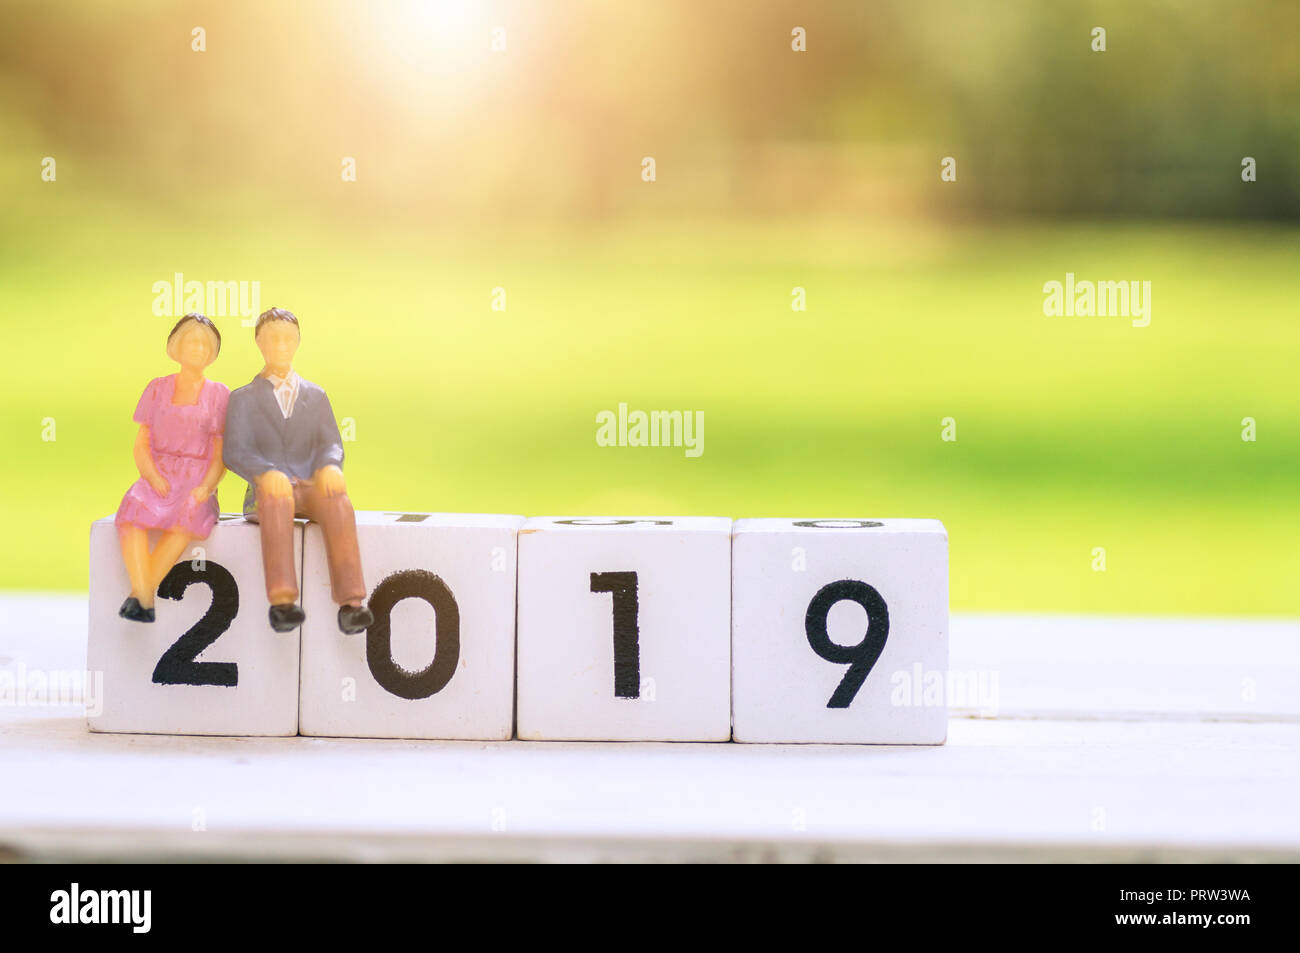 Love couple cartoon sitting on wood block with 2019, wife and husband talking and planing for New Year life Stock Photo